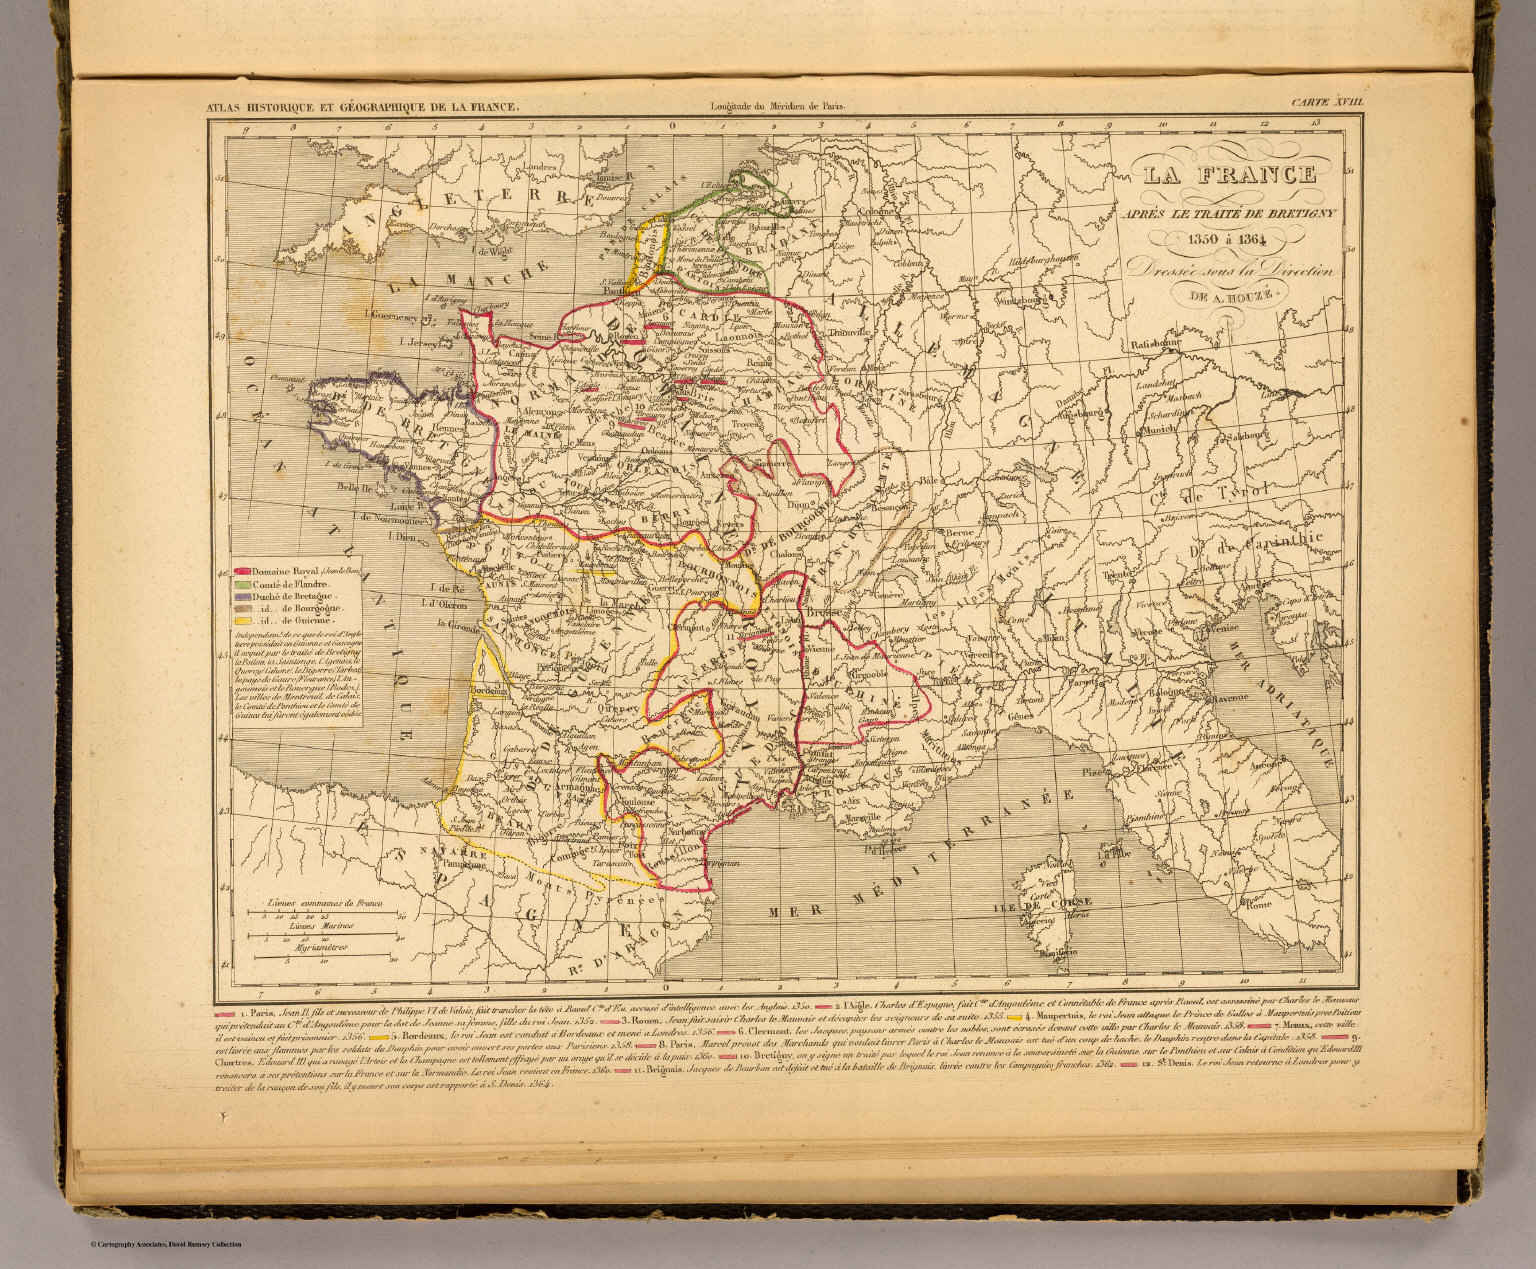 la-france-1350-a-1364-david-rumsey-historical-map-collection